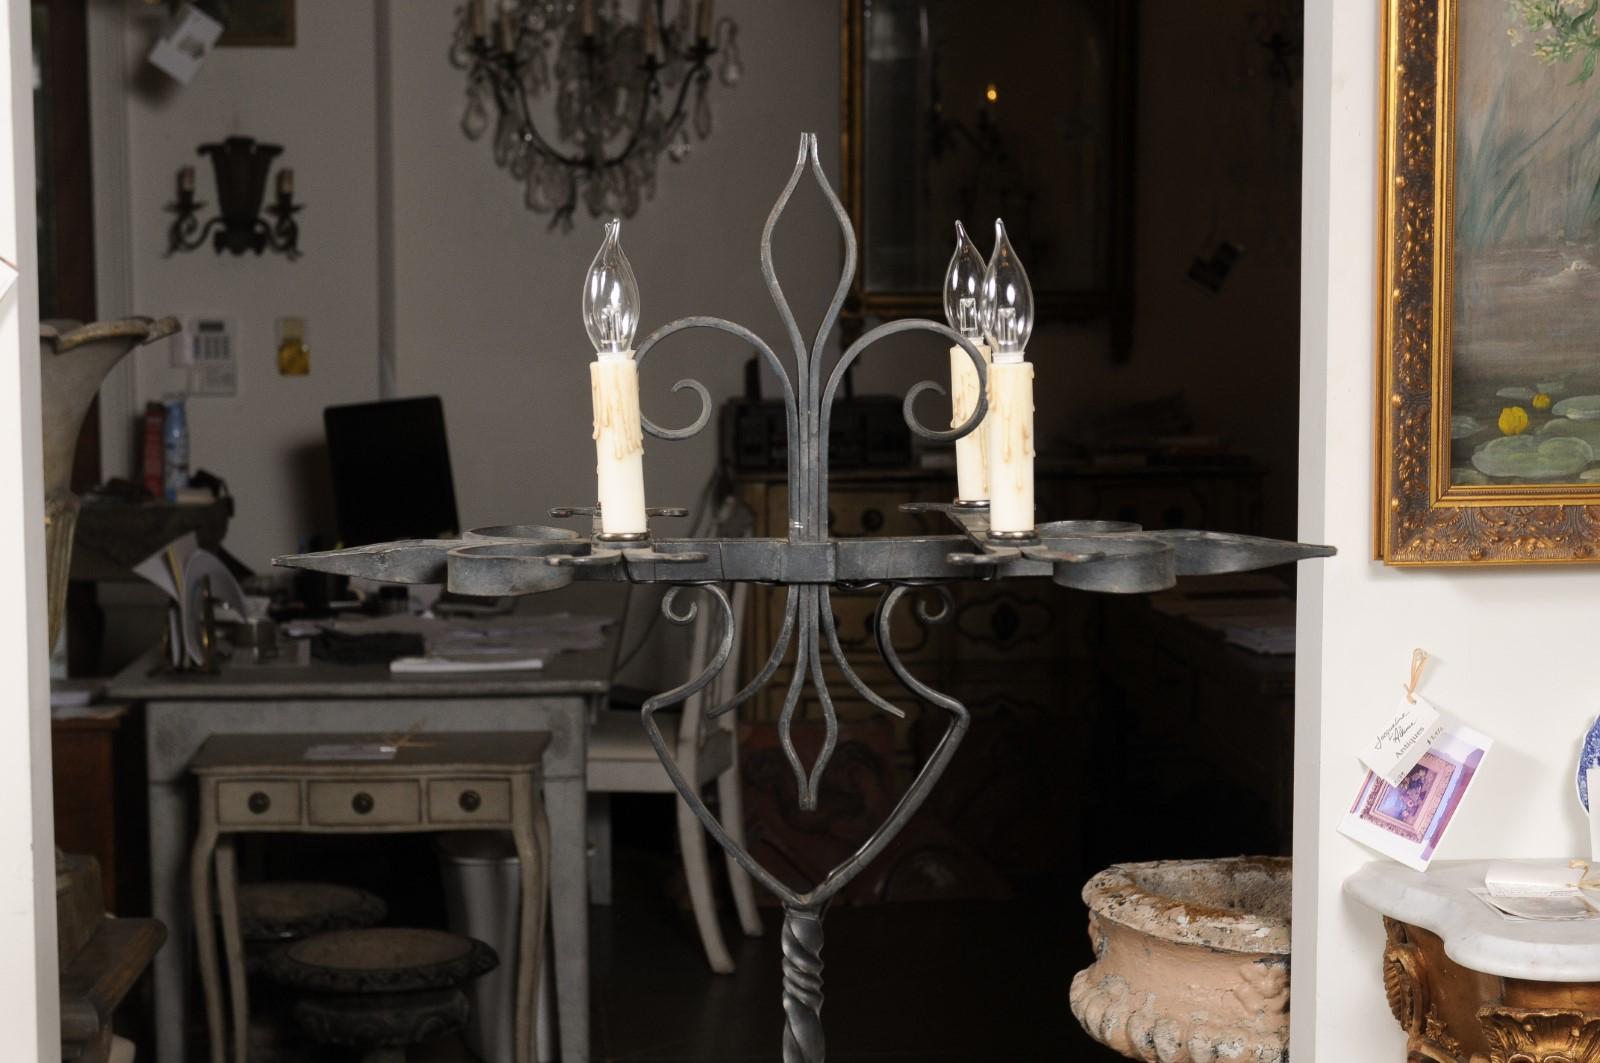 French Turn of the Century Candelabras Style Four-Light Wrought-Iron Floor Lamp For Sale 9